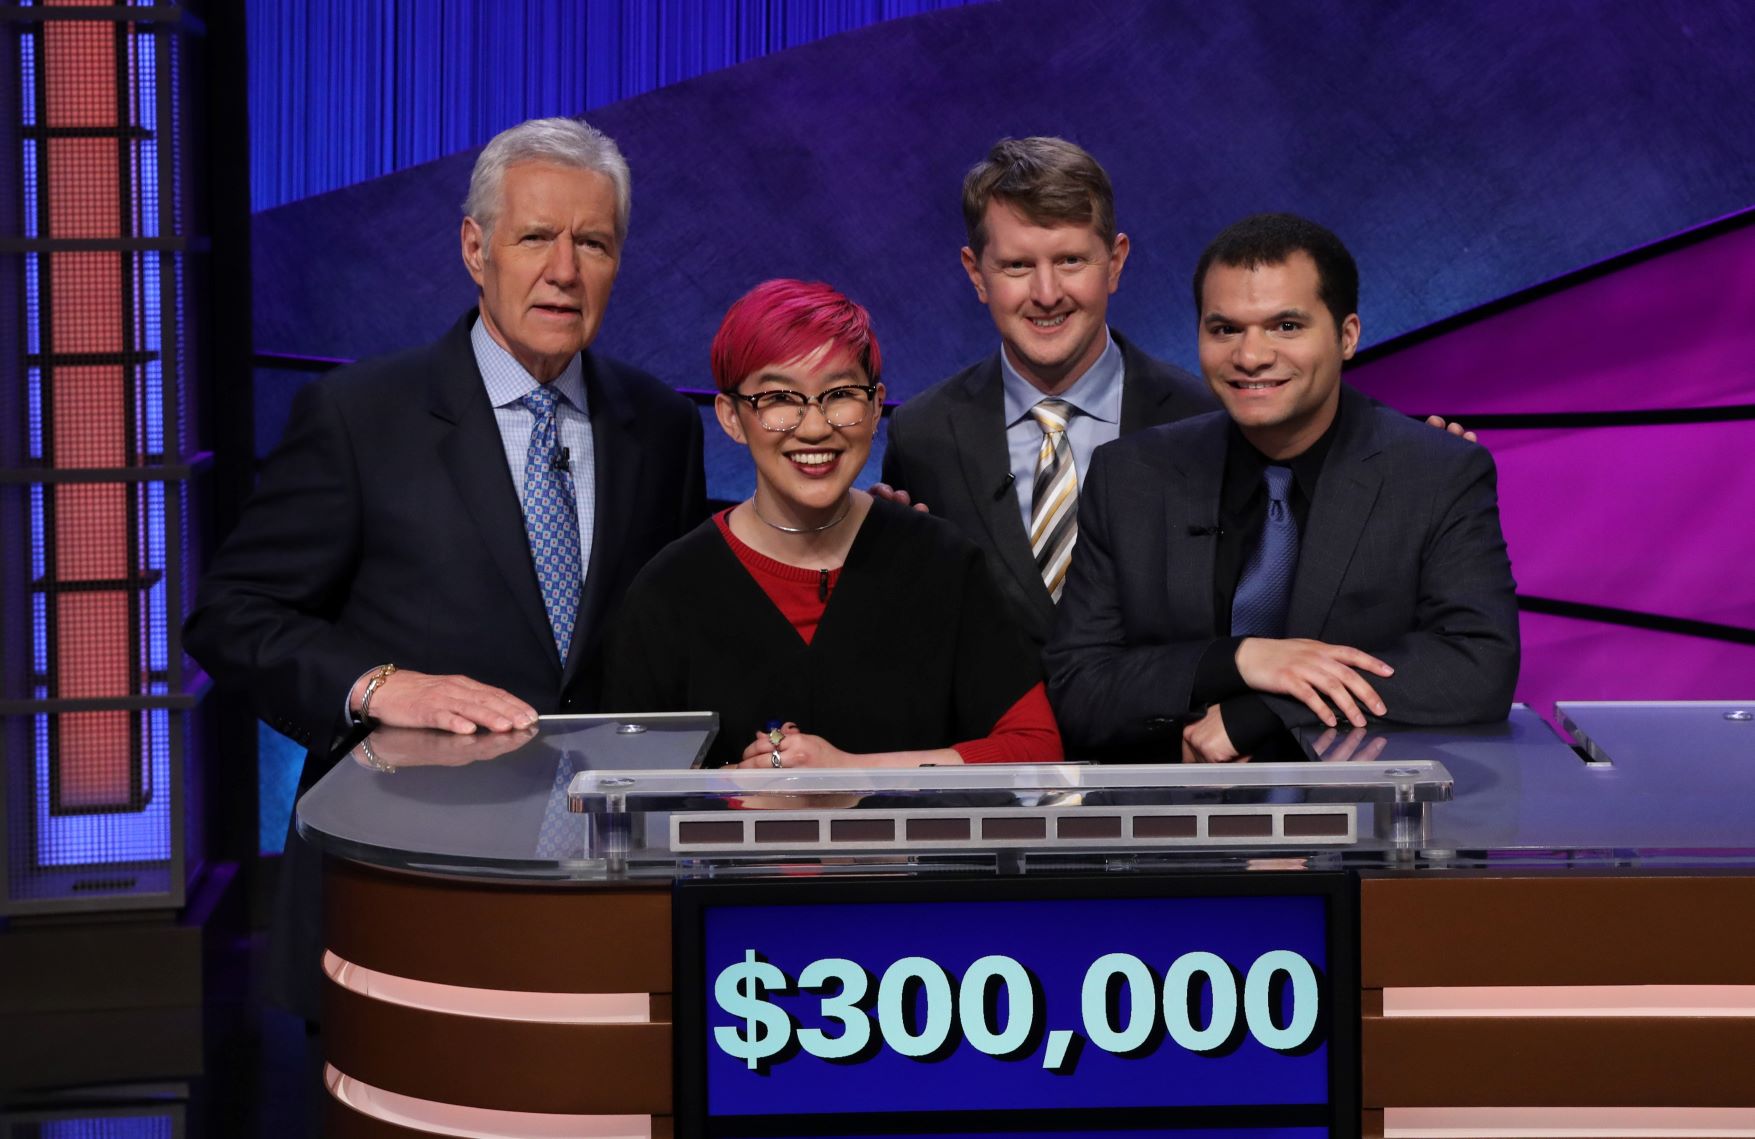 Four smiling people standing at a Jeopardy! games desk with "$300,000" on the screen.